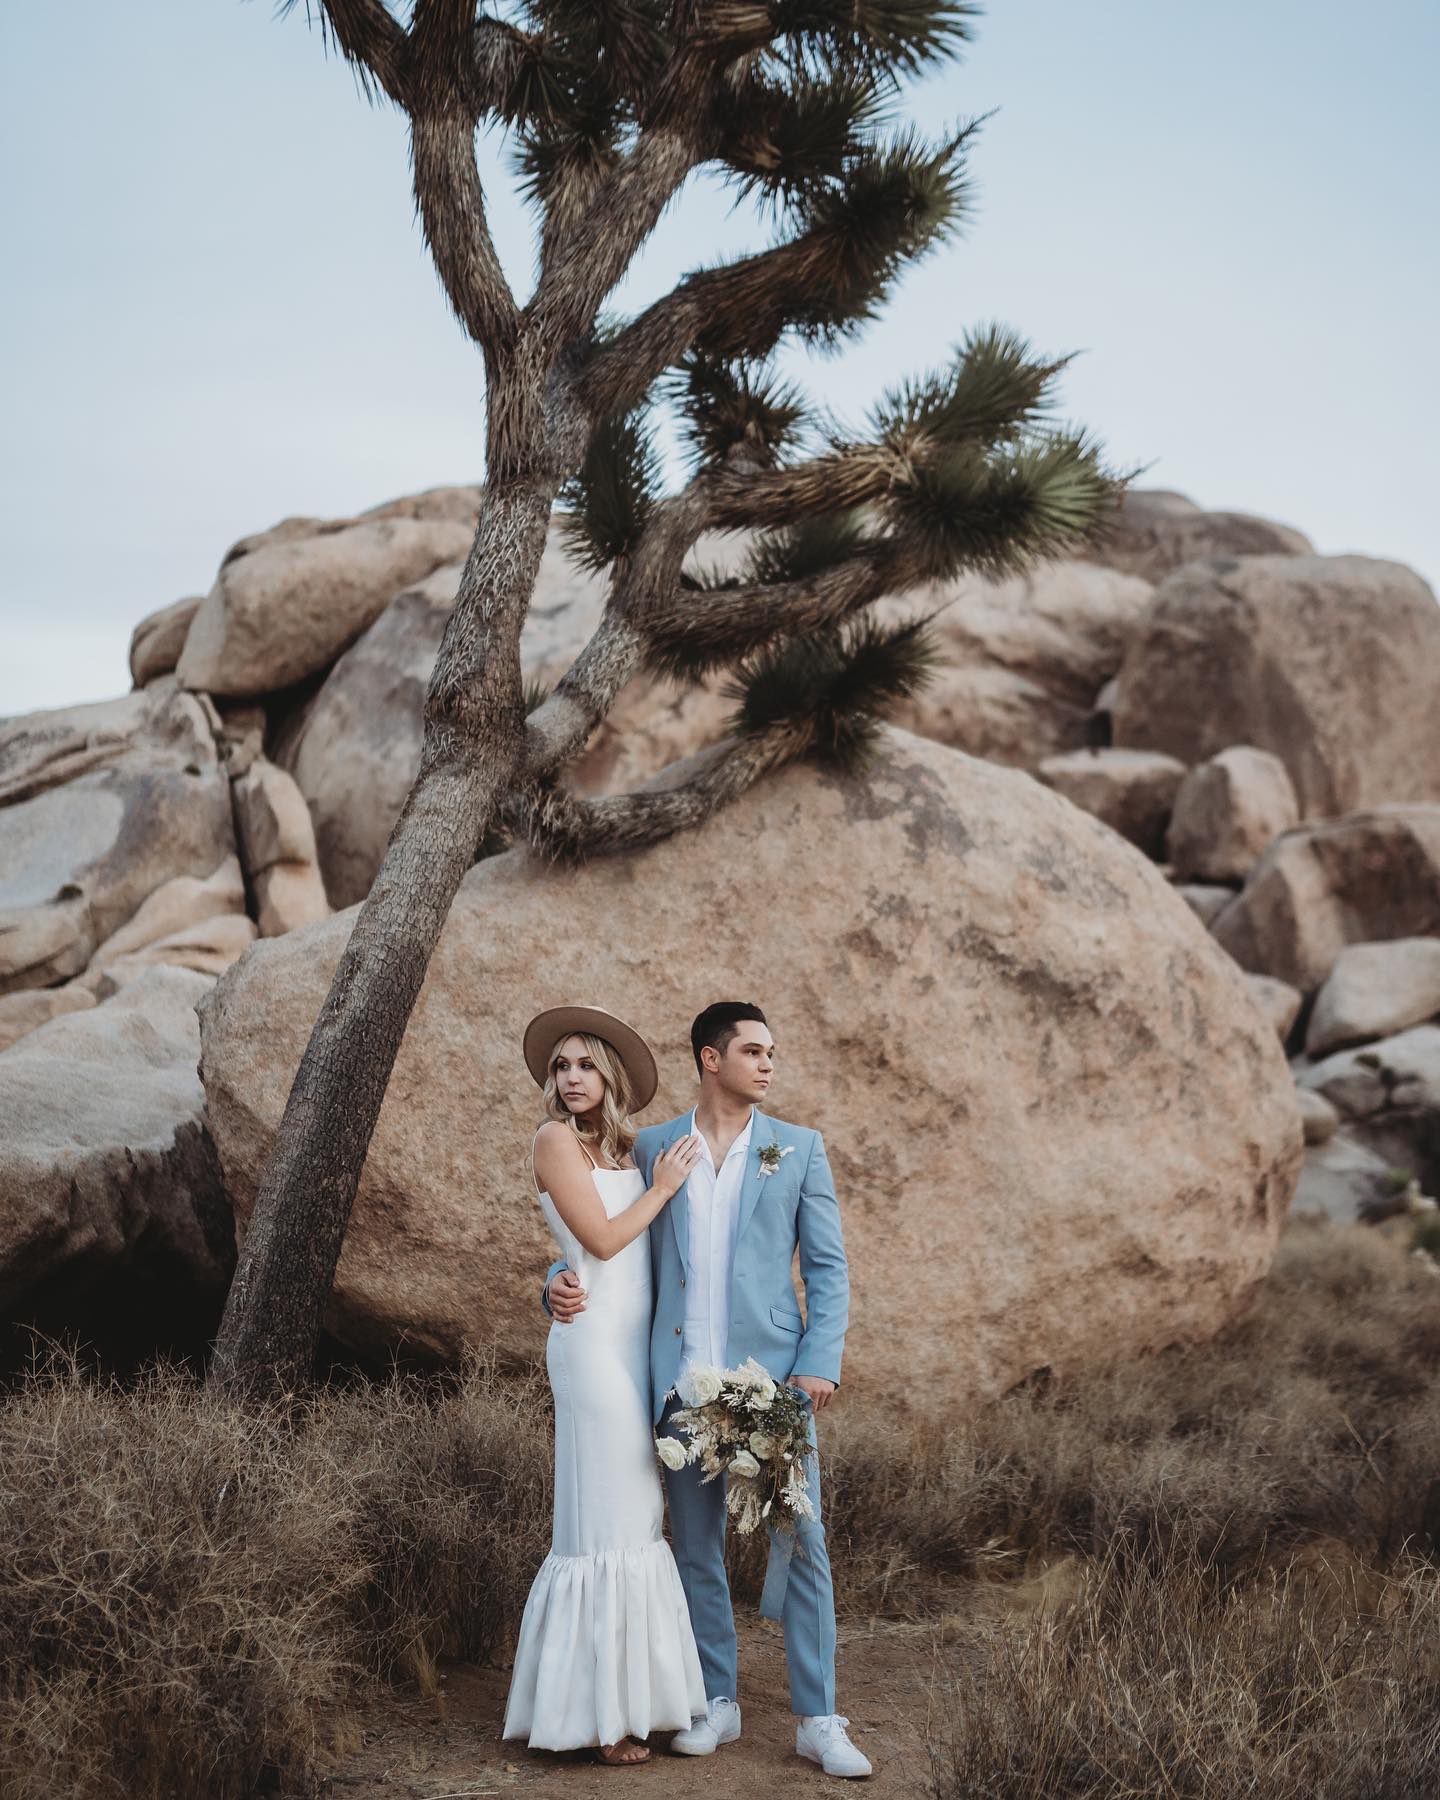 A bride and groom posing in a desert